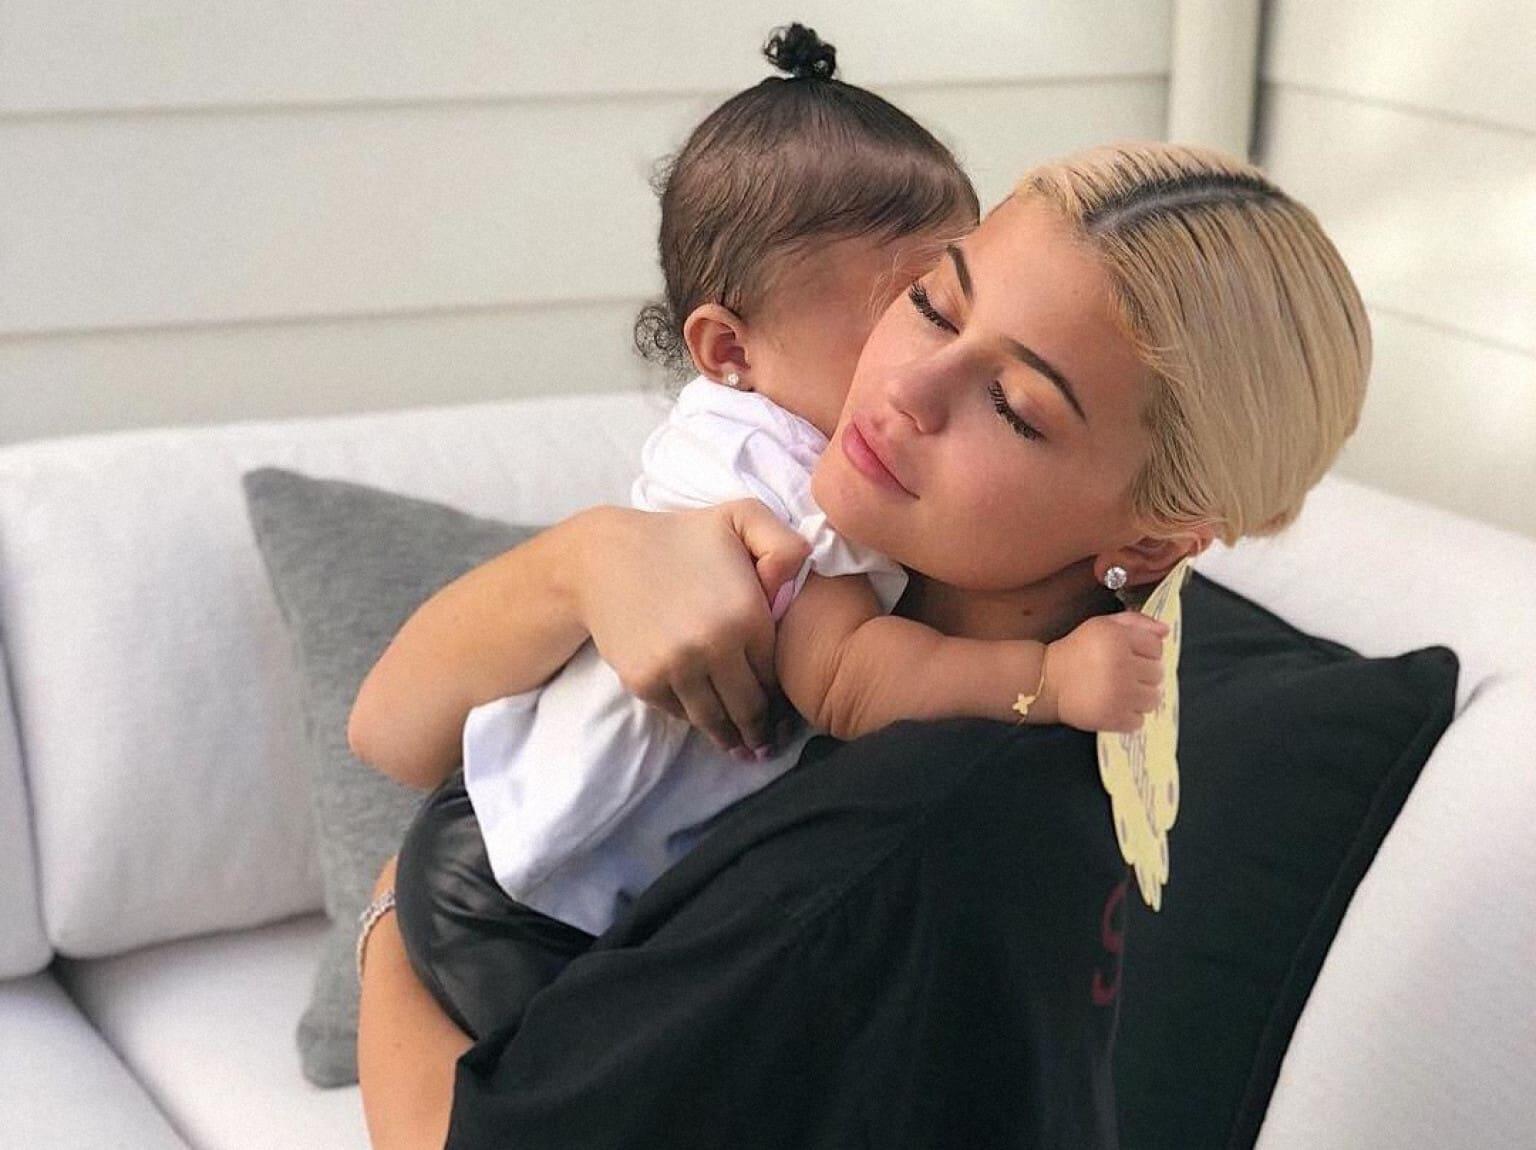 Kuwk Kylie Jenner Gets Told Off By Daughter Stormi For Not Being Quiet During Frozen 2 Viewing 